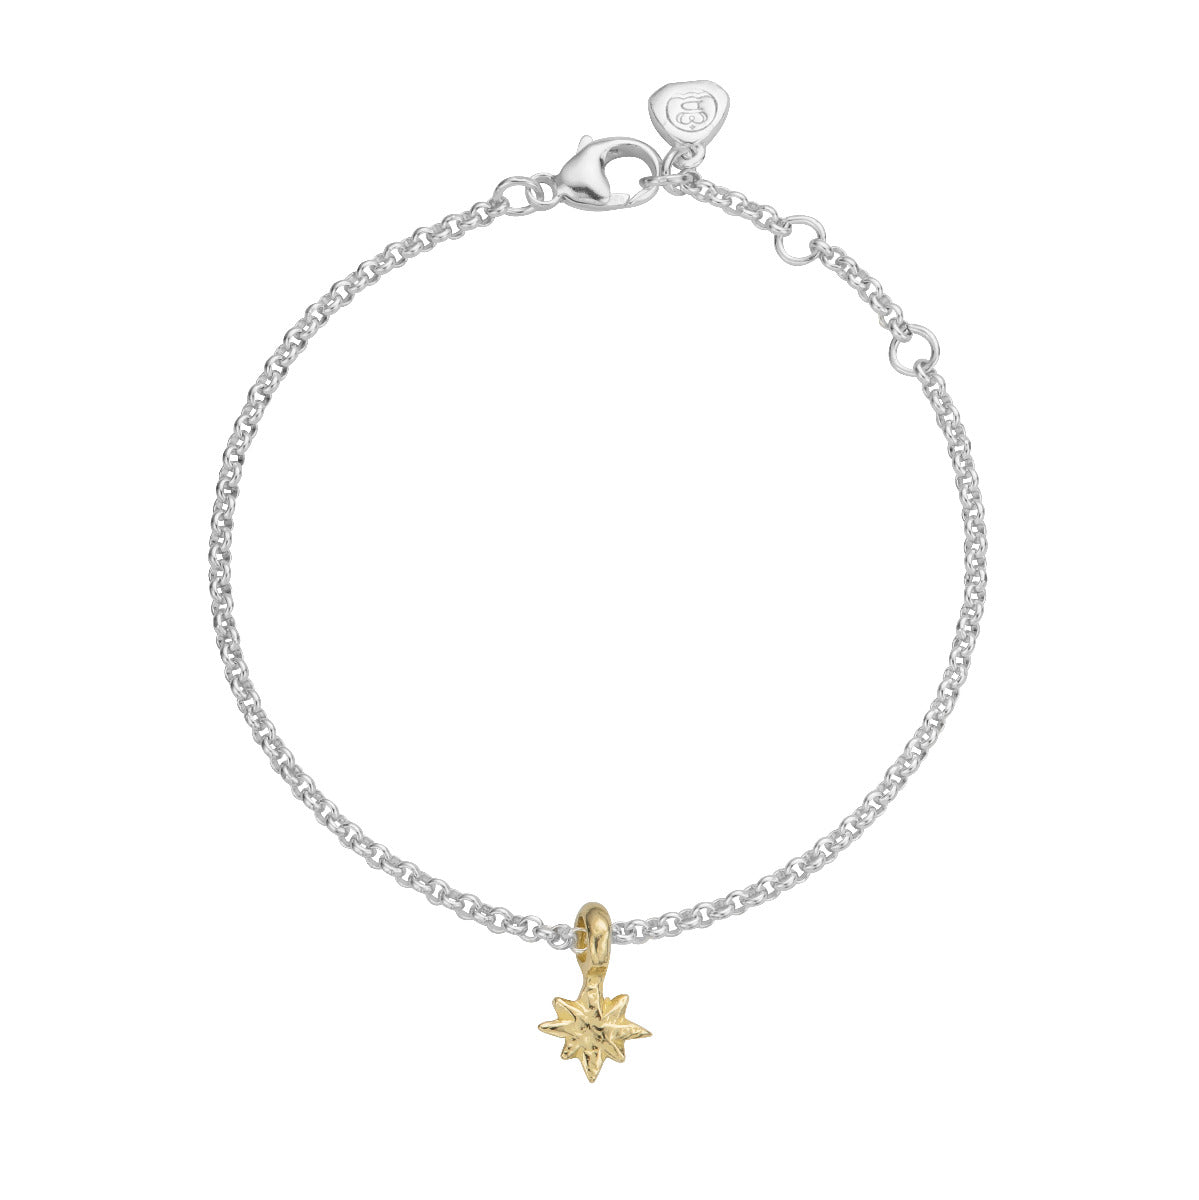 Silver & Gold Baby North Star Chain Bracelet